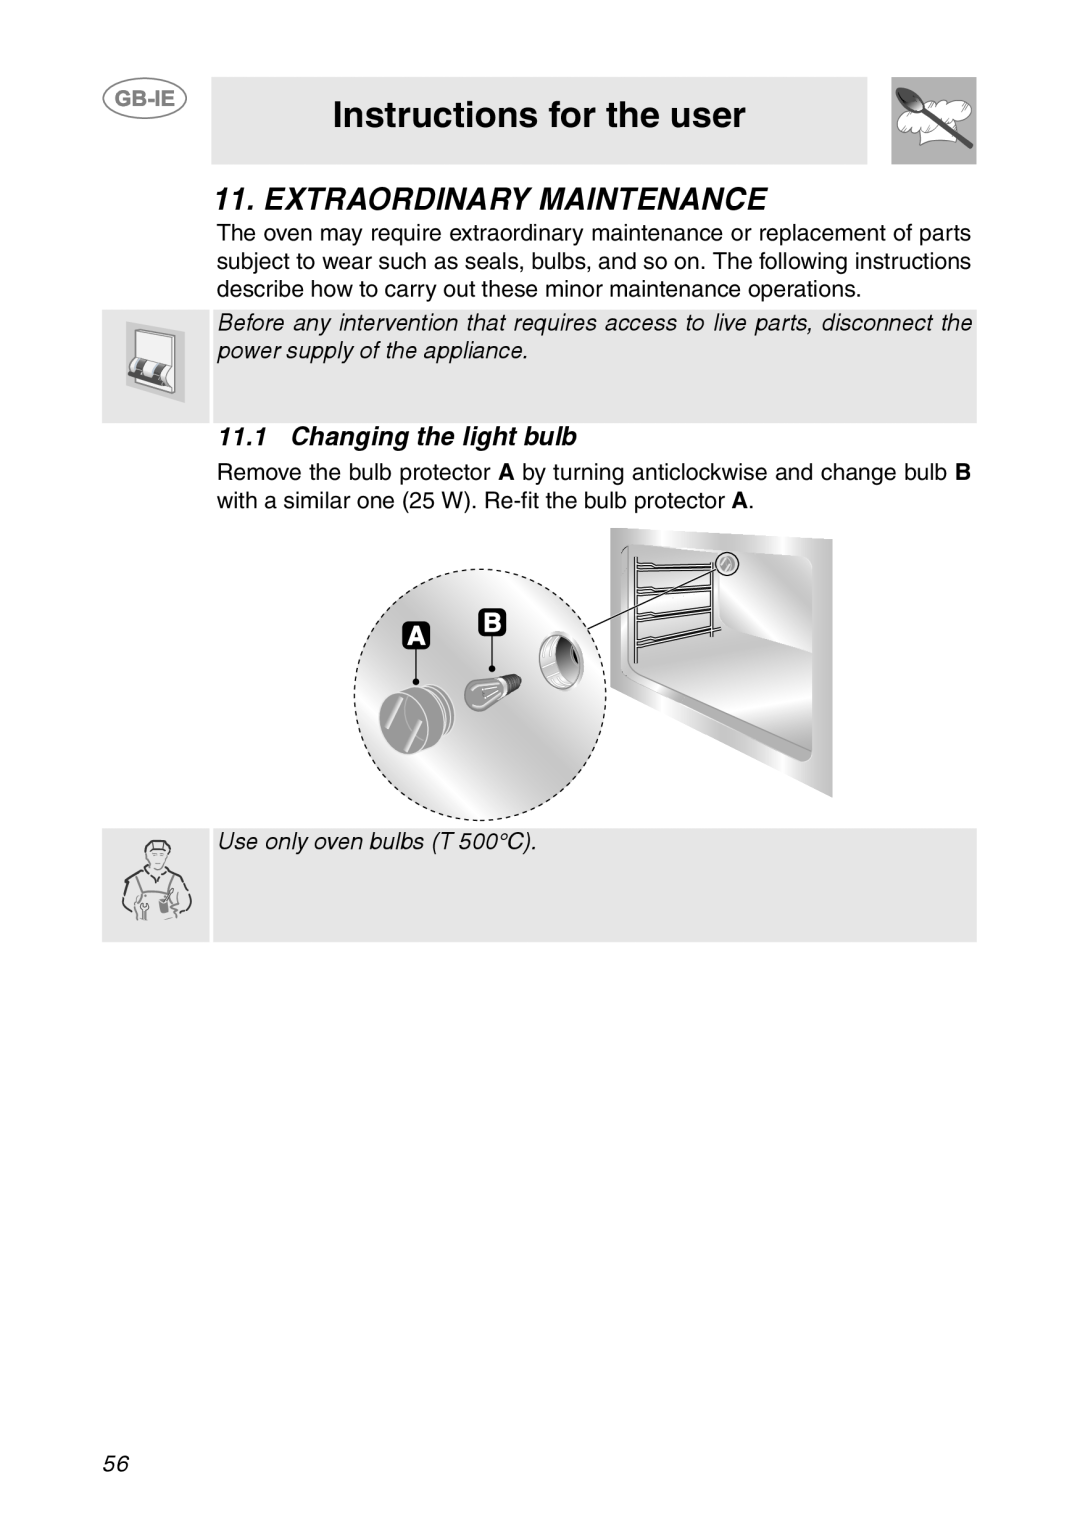 Smeg FP131B1 Extraordinary Maintenance, Instructions for the user, Changing the light bulb, Use only oven bulbs T 500C 